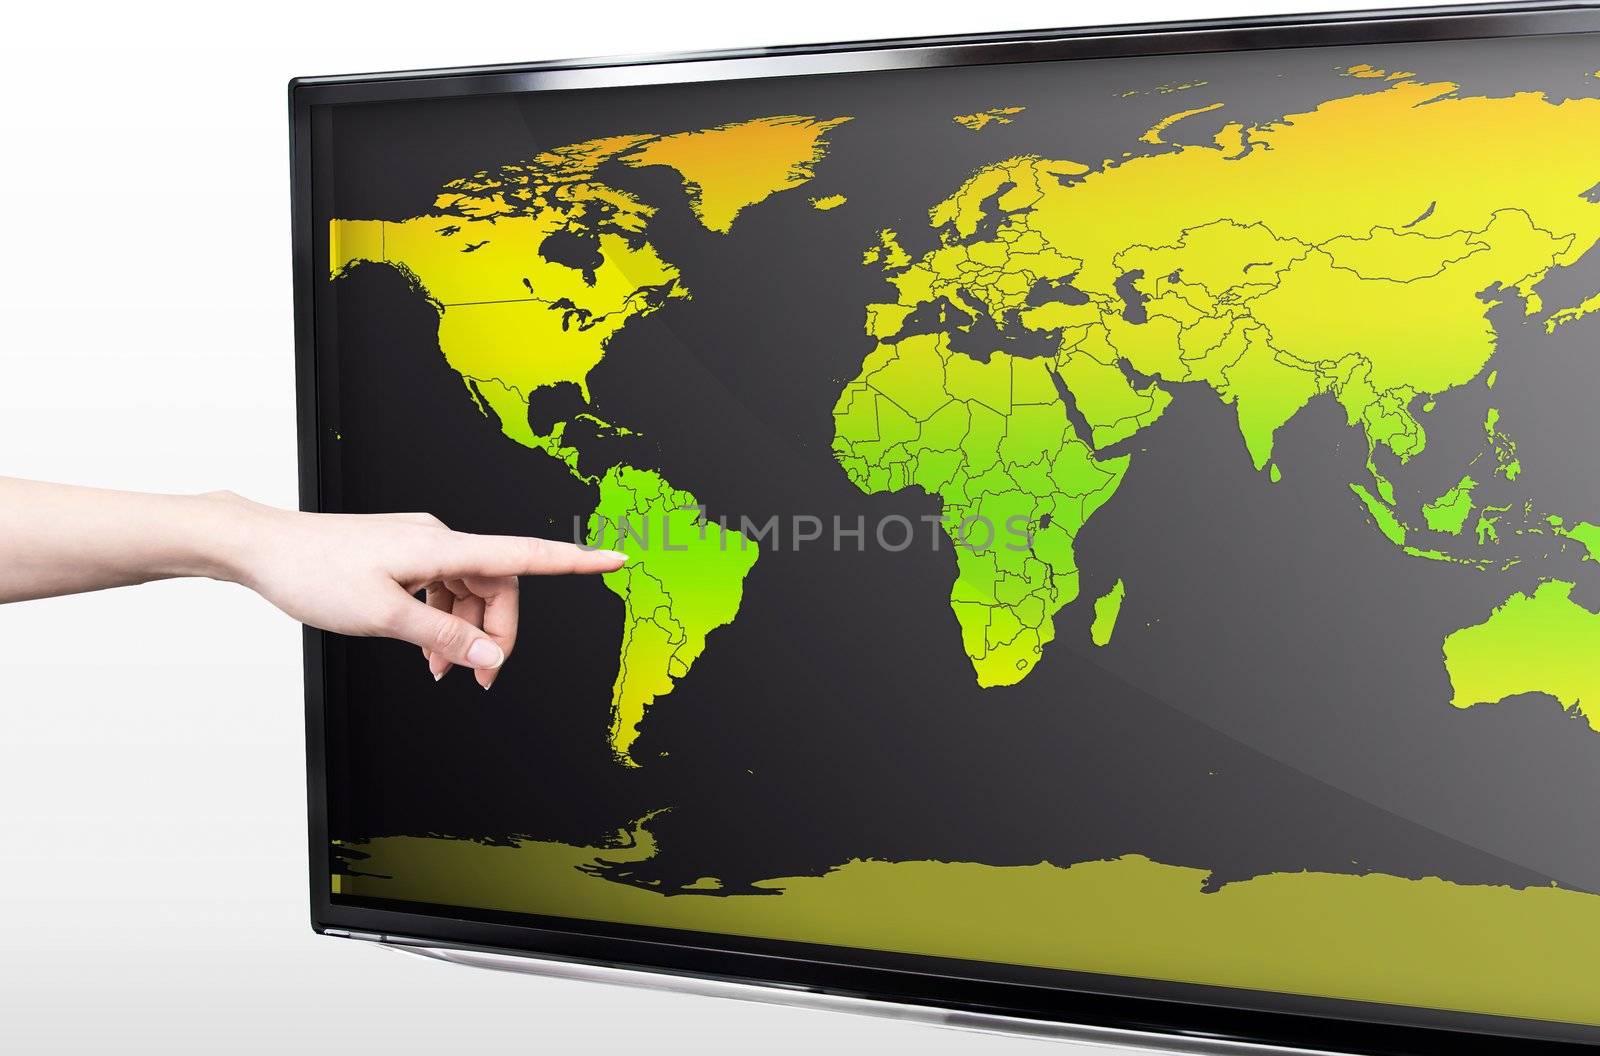 Hand showing blank world map on LED TV screen